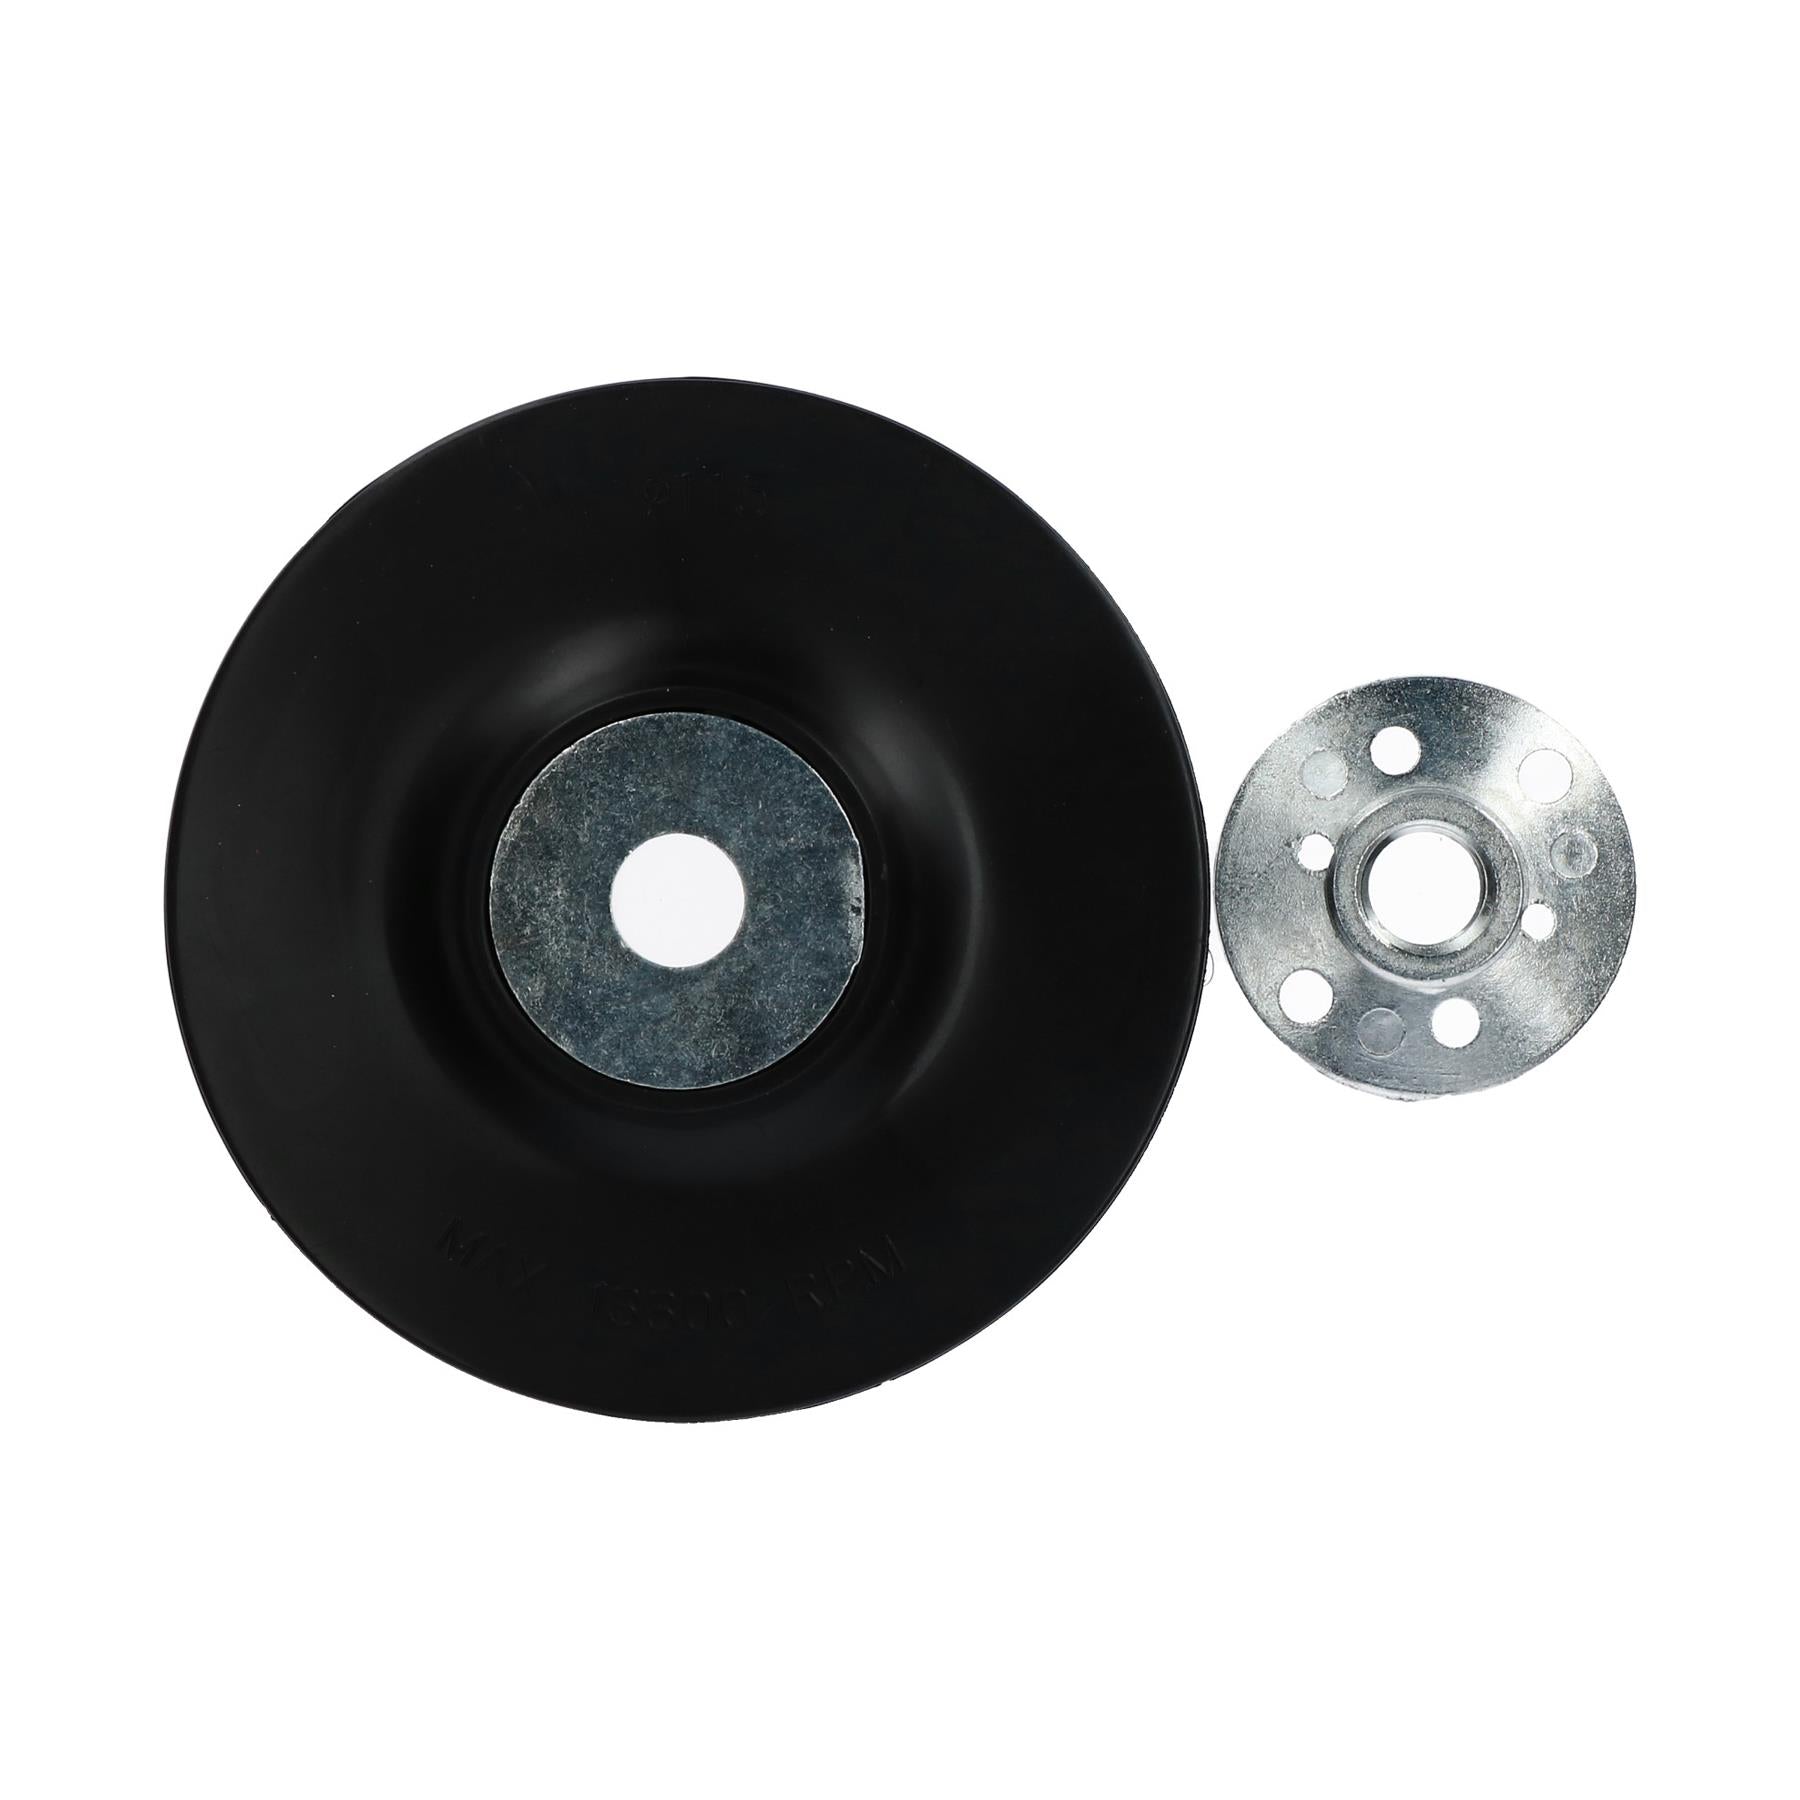 M14 115mm Thread Plastic Backing Pad For 4-1/2" Angle Grinders Sanders Discs